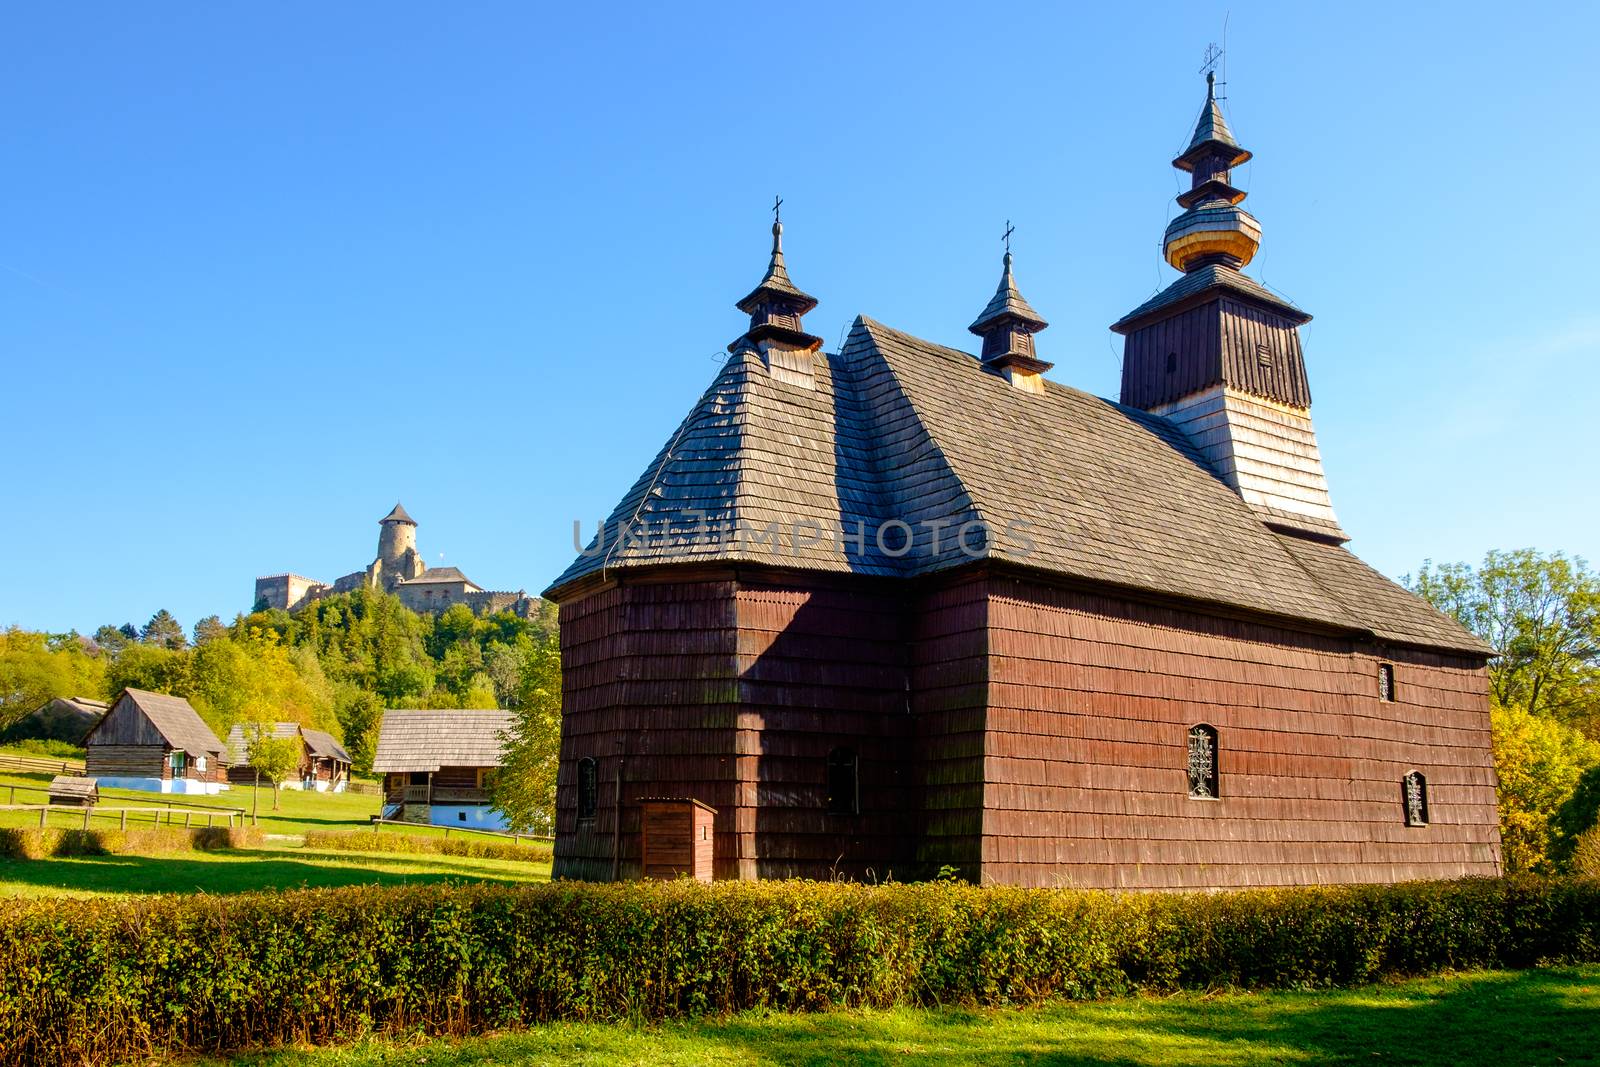 Scenic view of old traditional Slovak wooden church, Slovakia by martinm303